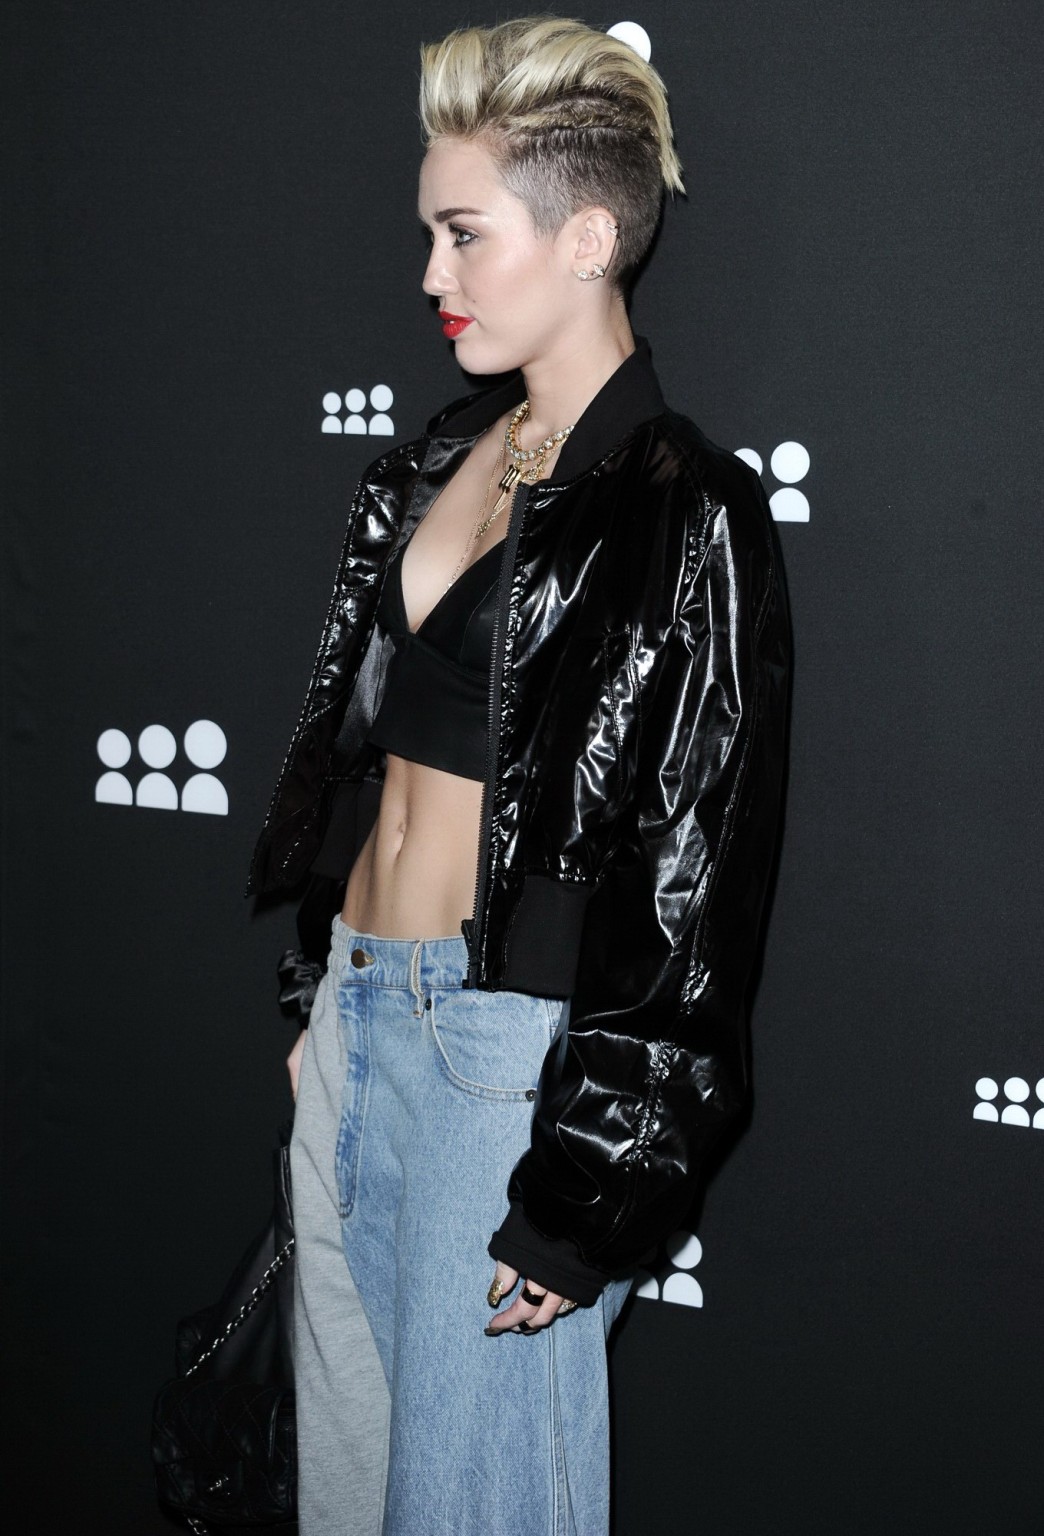 Miley Cyrus wearing a leather crop top at the Myspace launch event #75228795